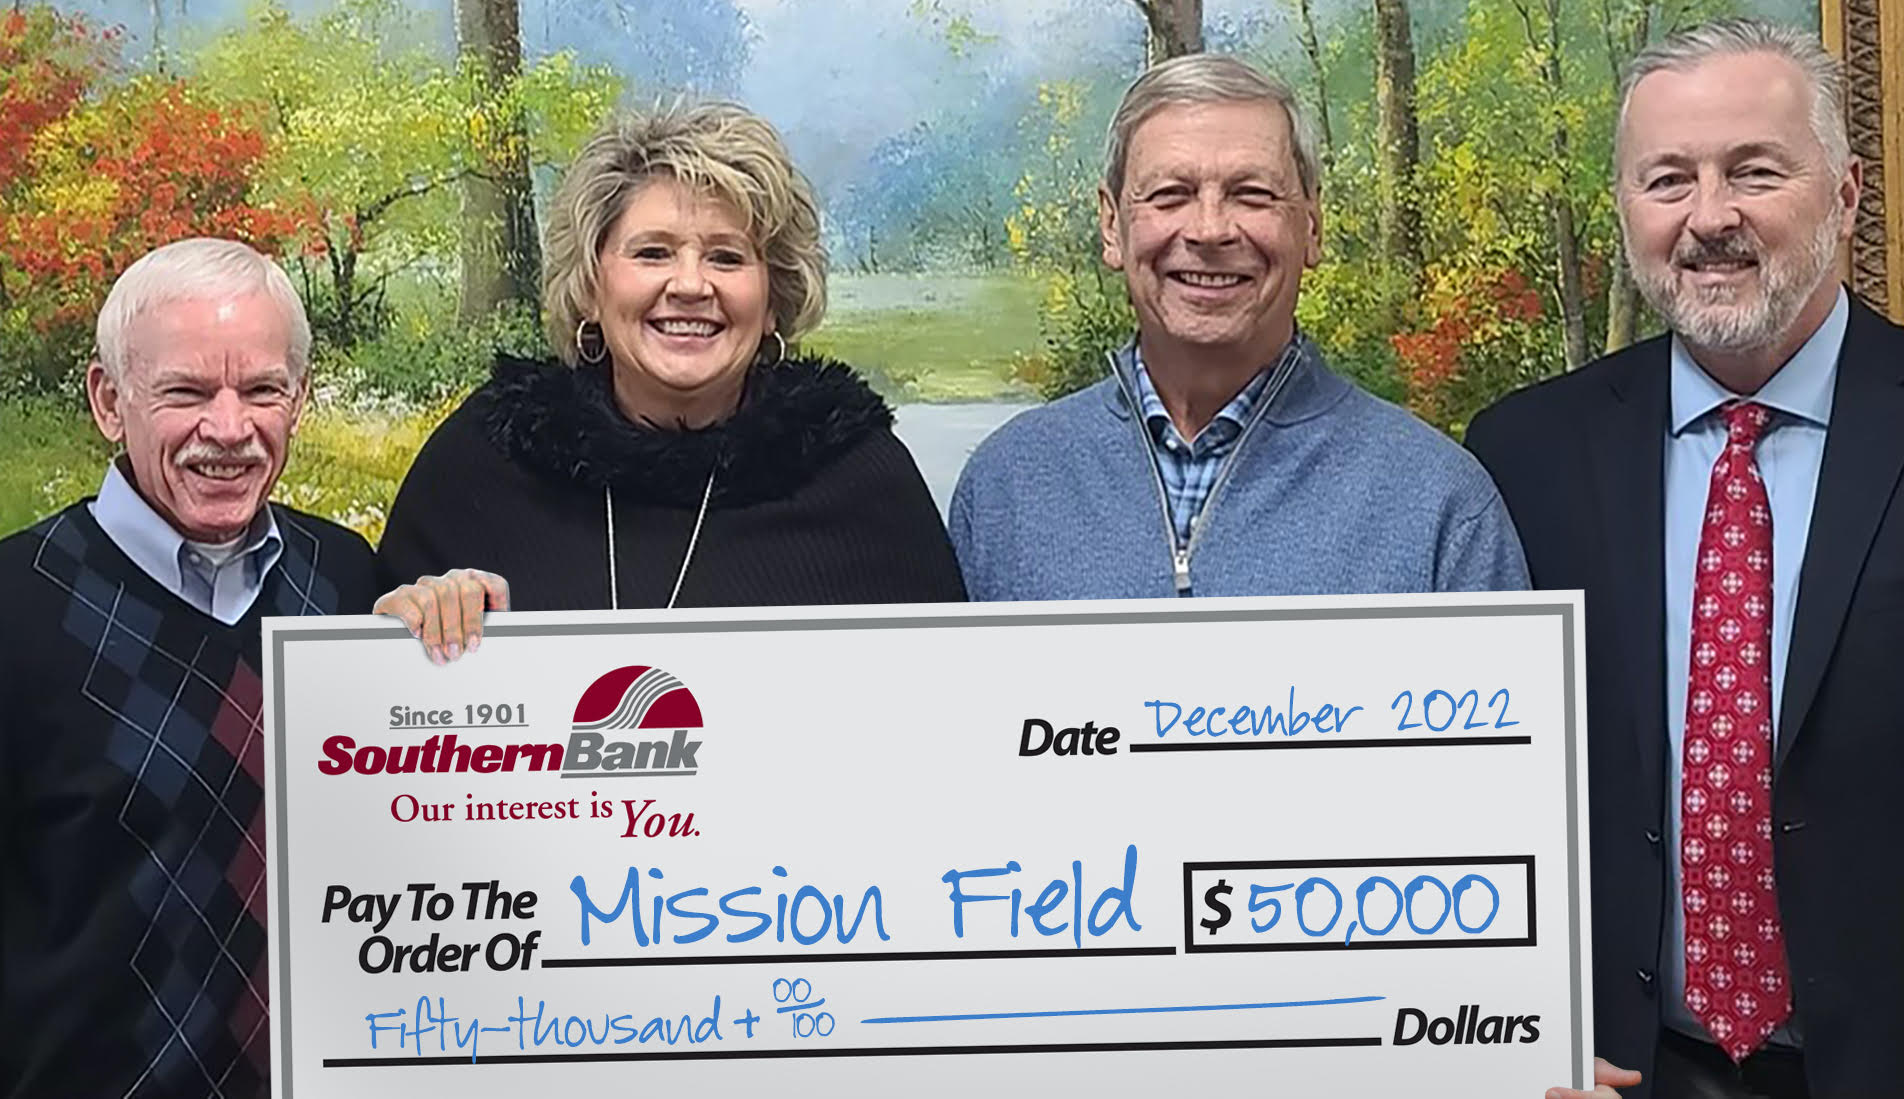 Michael Bryant (far right) and Kim Sutton (second from left) of Southern Bank present a $50,000 check to Kenneth Mullen (far left) and Robert Beaman in support of Mission Field Family Park. The Southern Bank Foundation has committed a total of $100,000 to the park that will serve chil-dren and families throughout the Nash, Edgecombe, Wilson area.